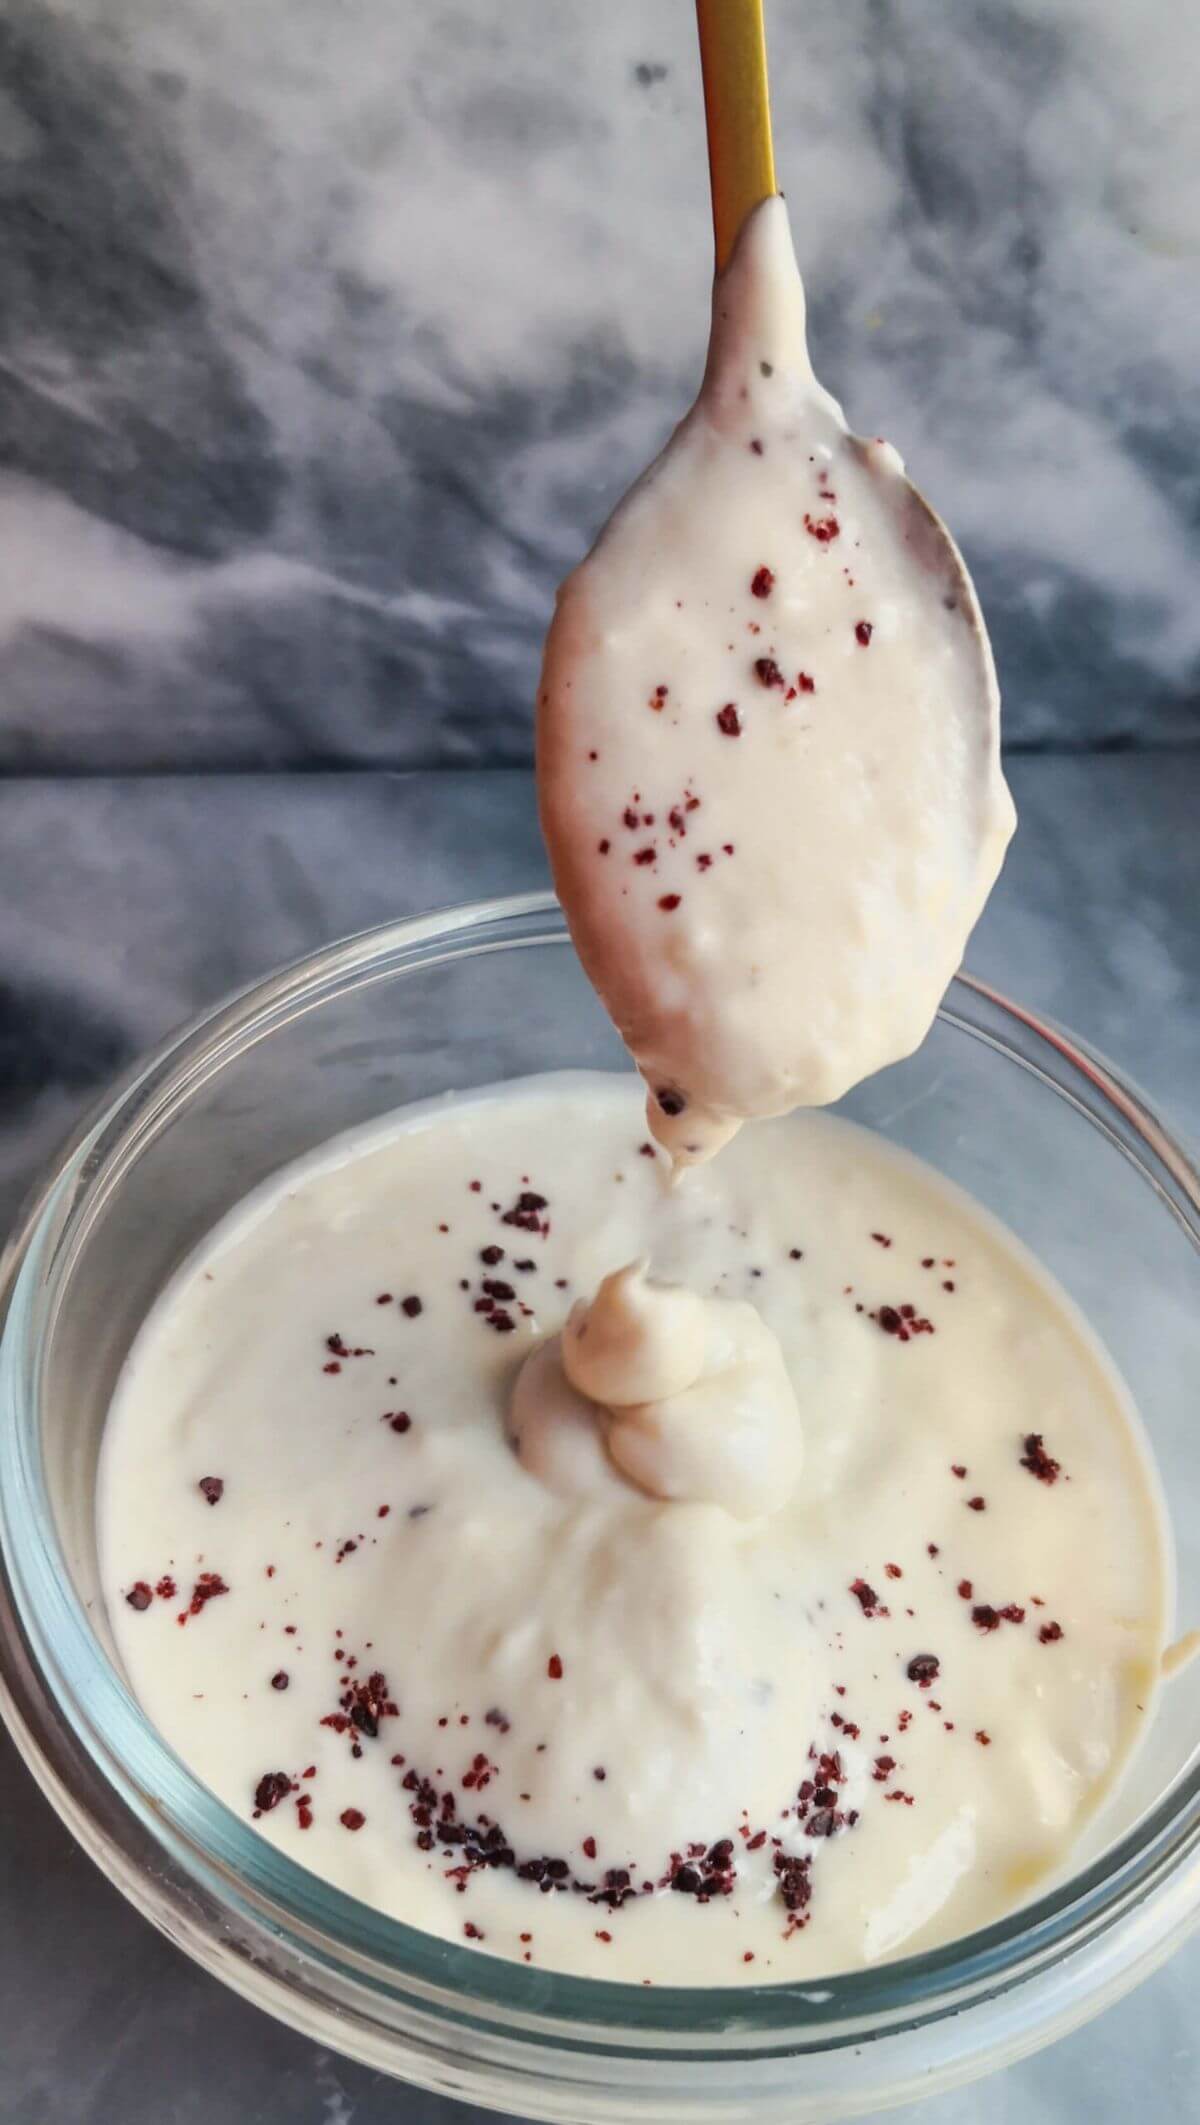 Tahini yogurt sauce being poured off a small gold spoon into a small glass bowl on a grey marble background.